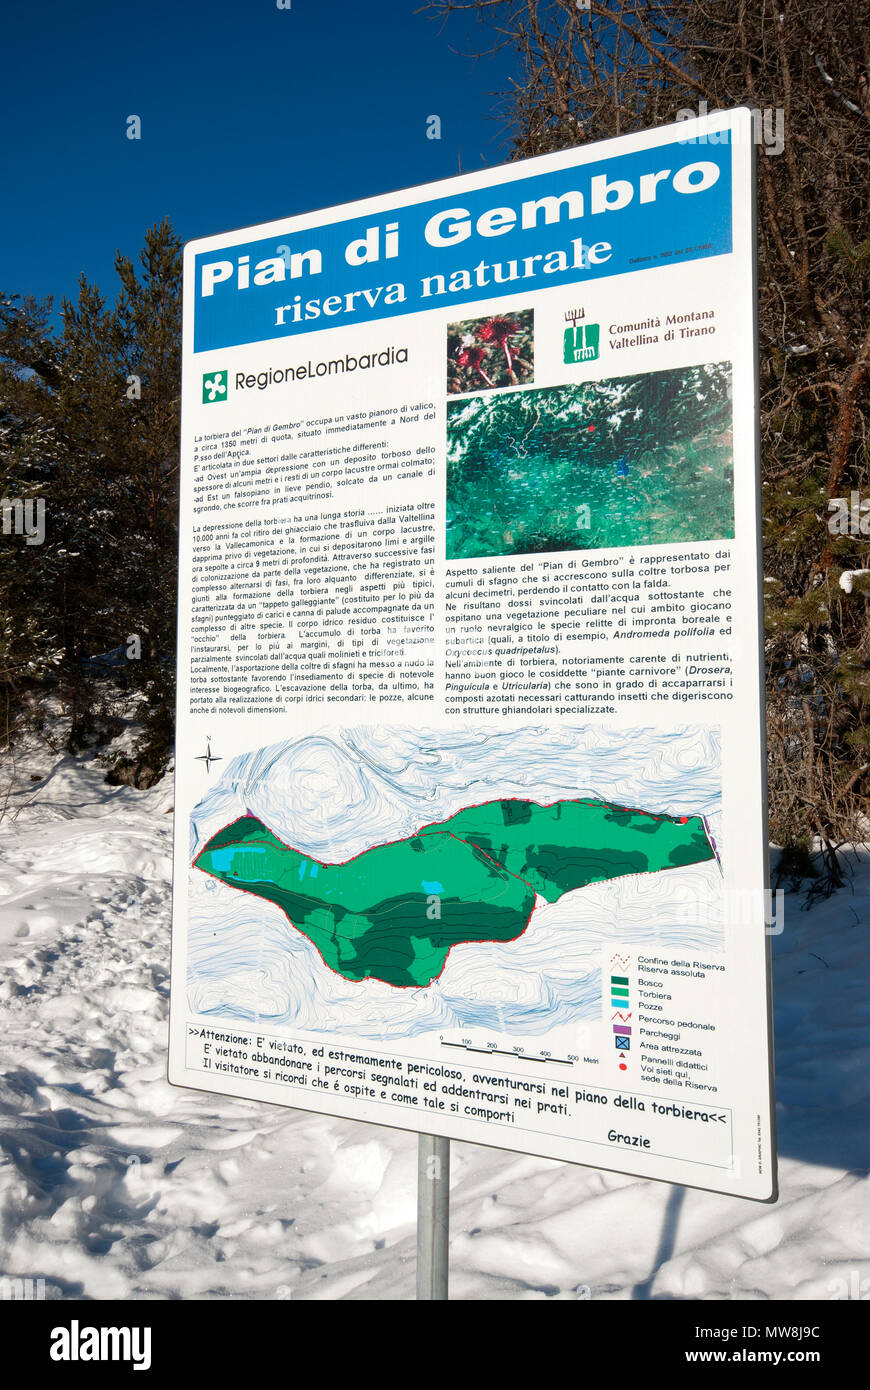 Information sign in Pian di Gembro Nature Reserve, Lombardy, Italy Stock Photo